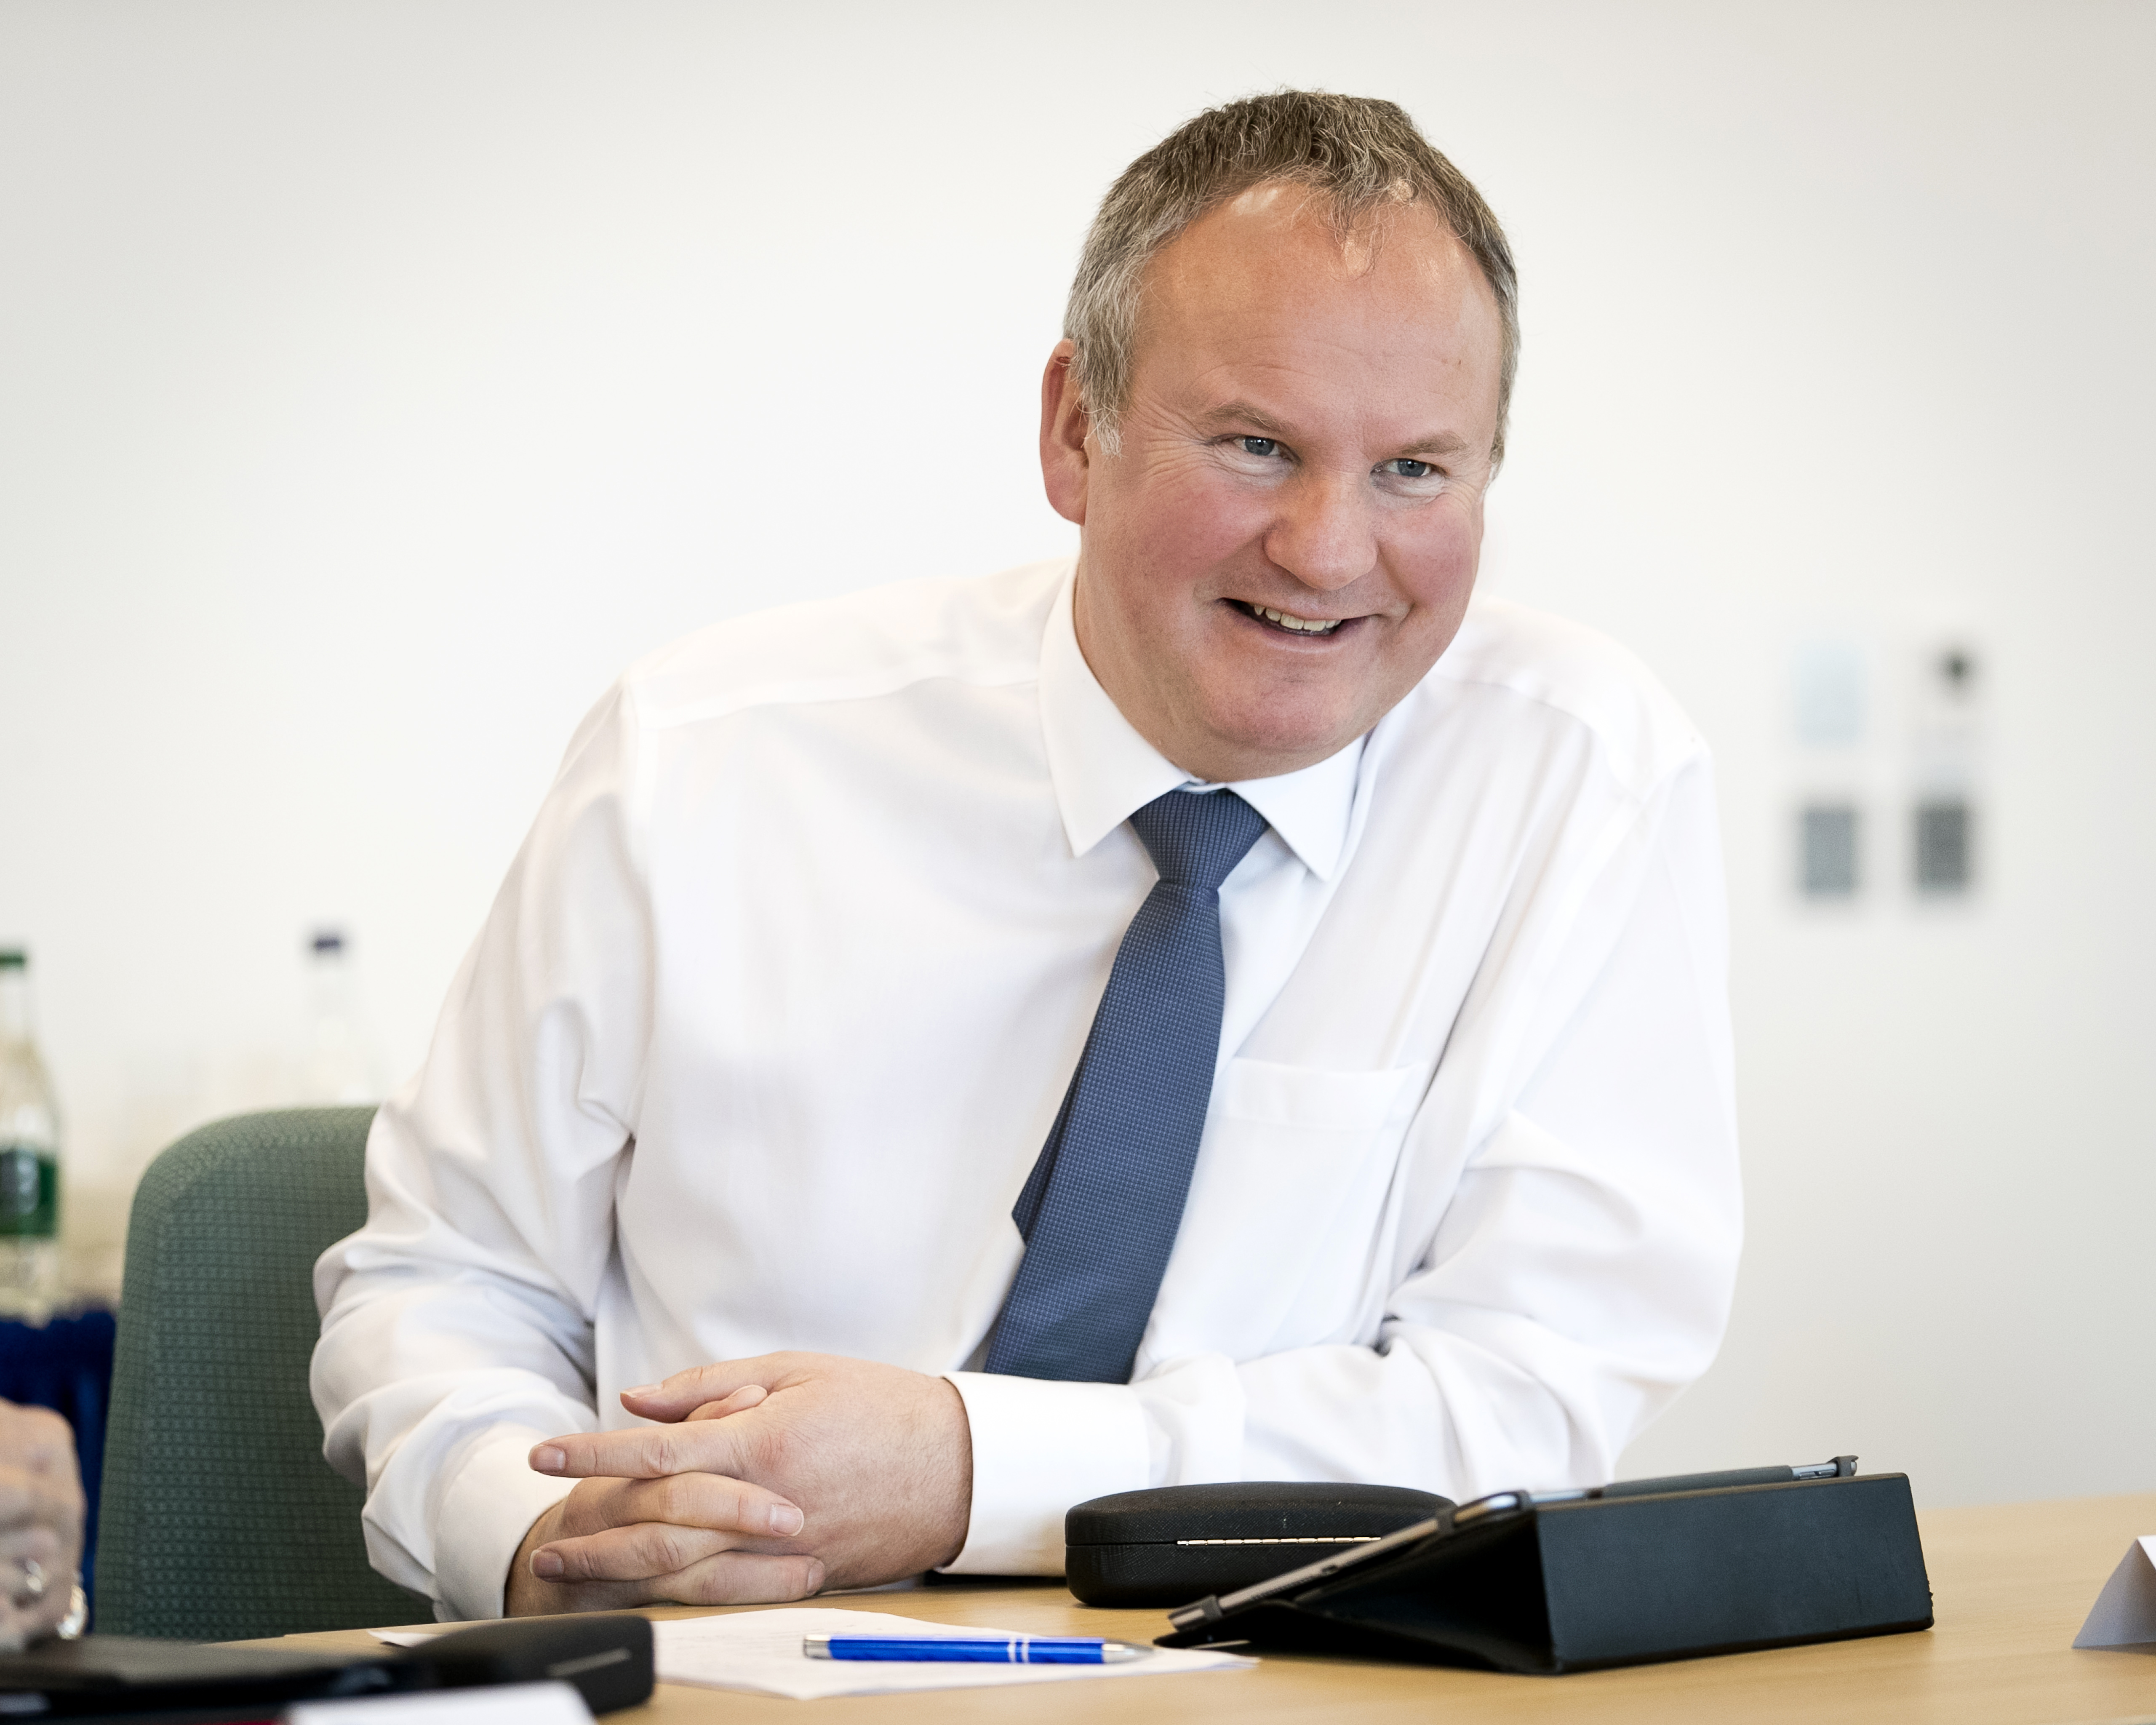 Scottish Building Society appoints former Barclays executive to its board